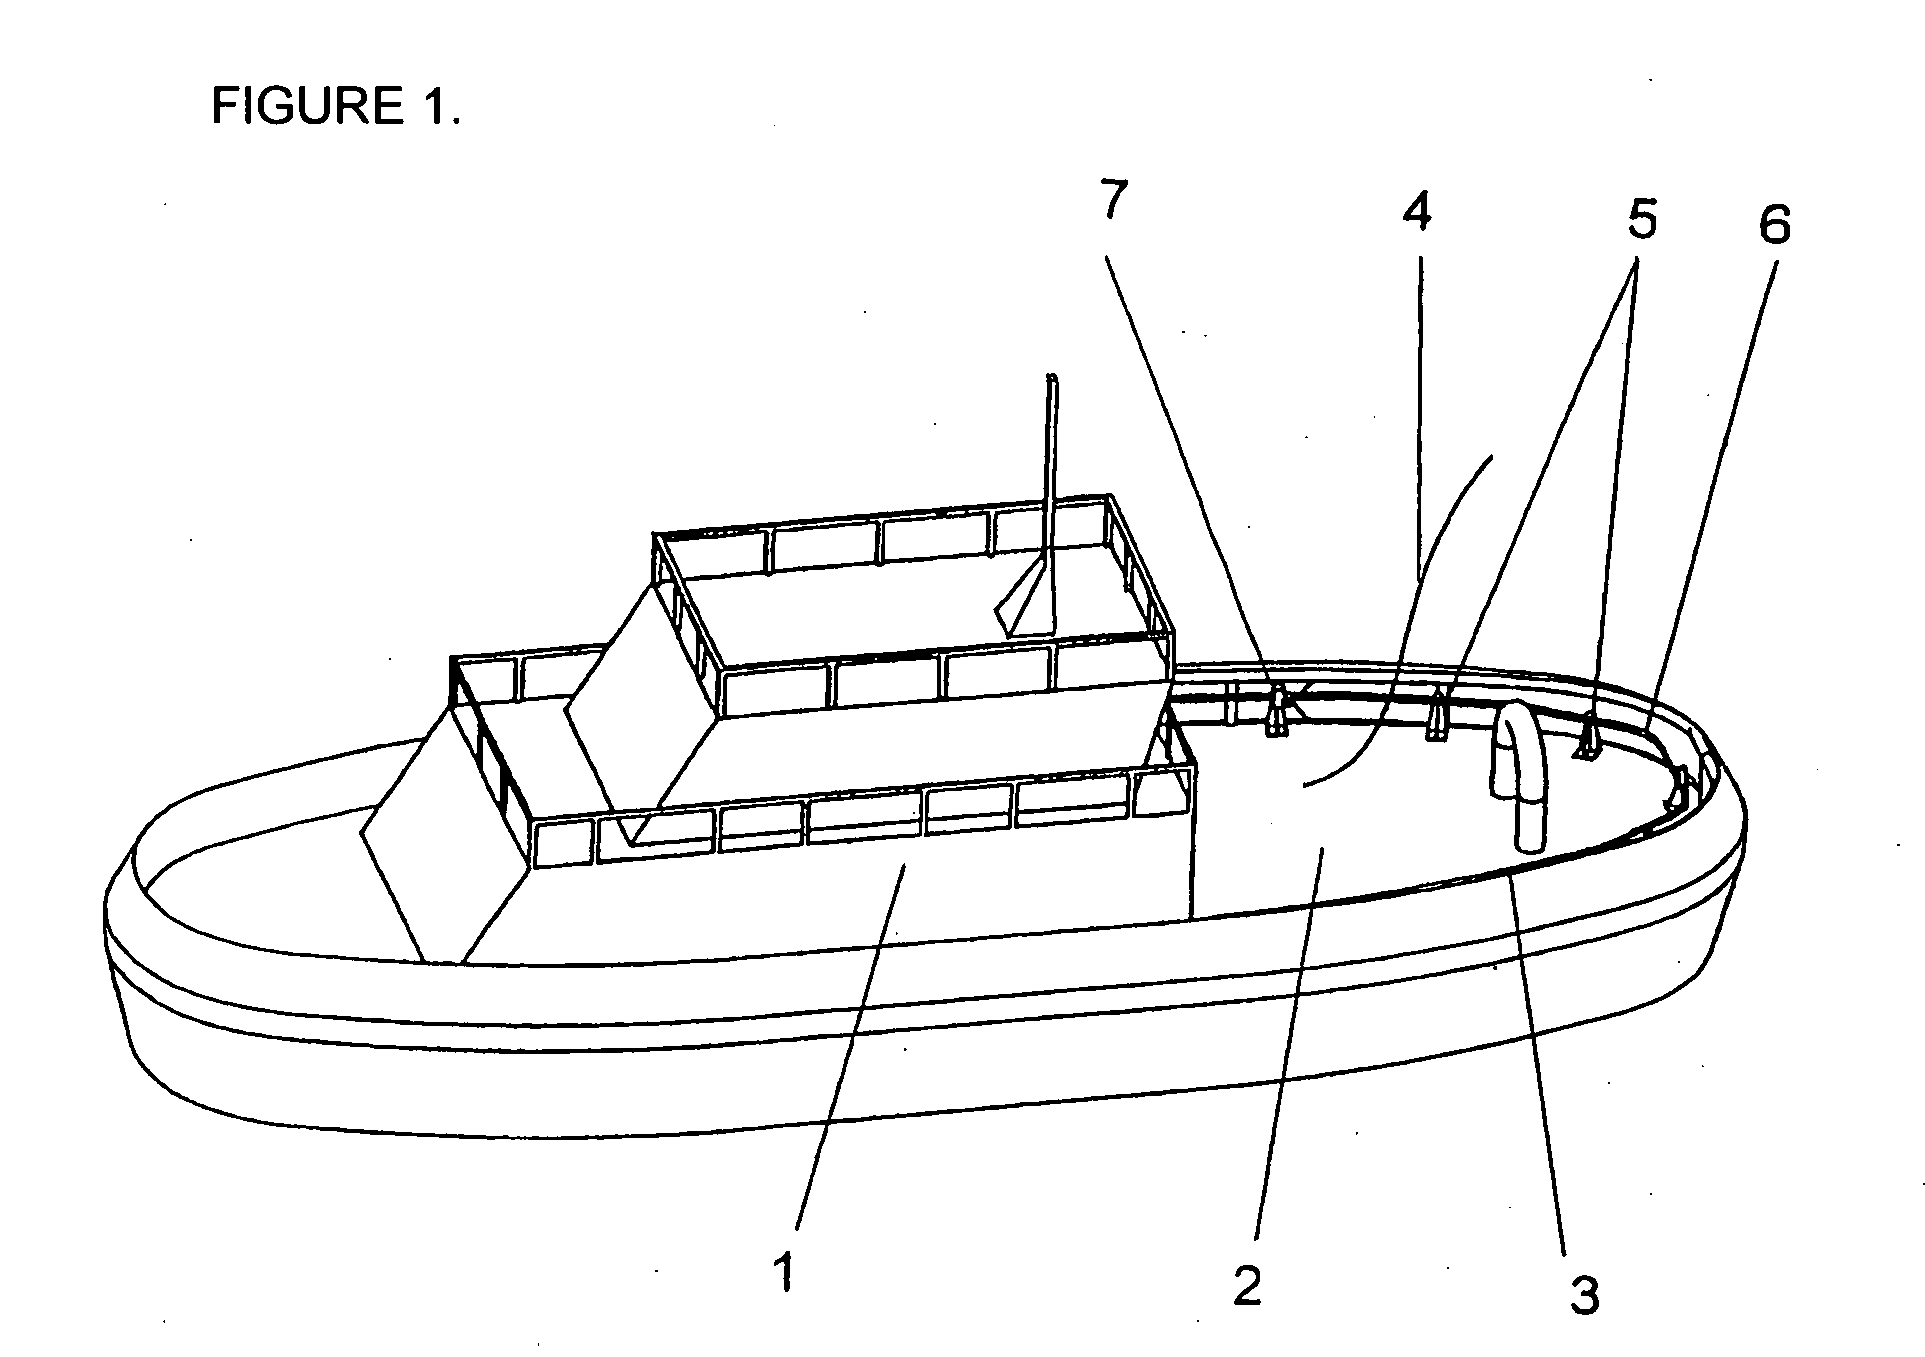 Automatic system for taking up and handling a connecting towrope between a tugboat and a towed vessel